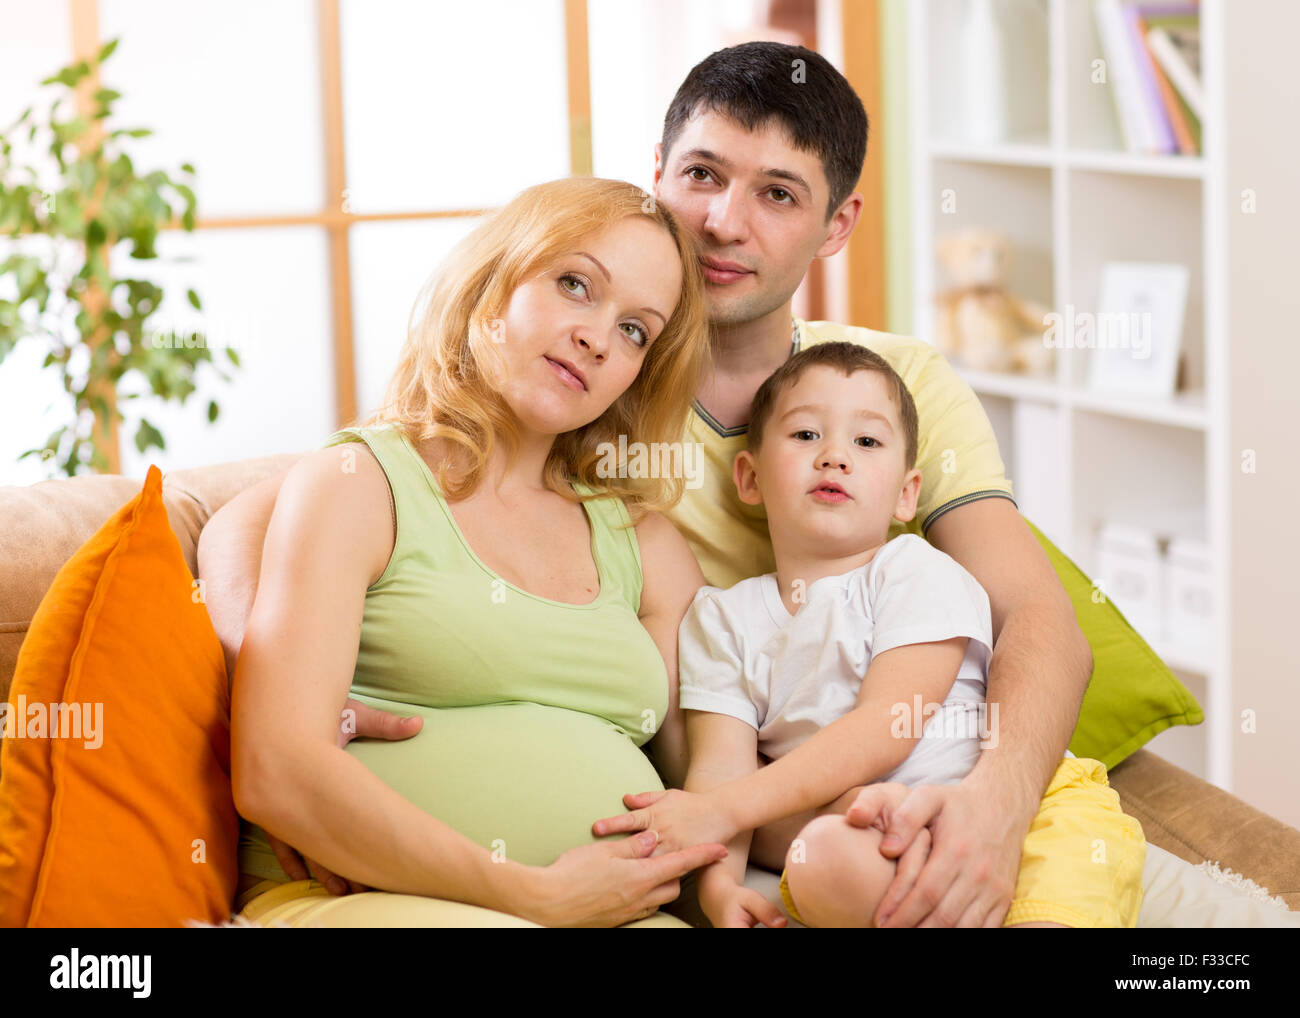 Happy Family Expecting Baby. Pregnant Woman with Husband and Little Son Together Stock Photo